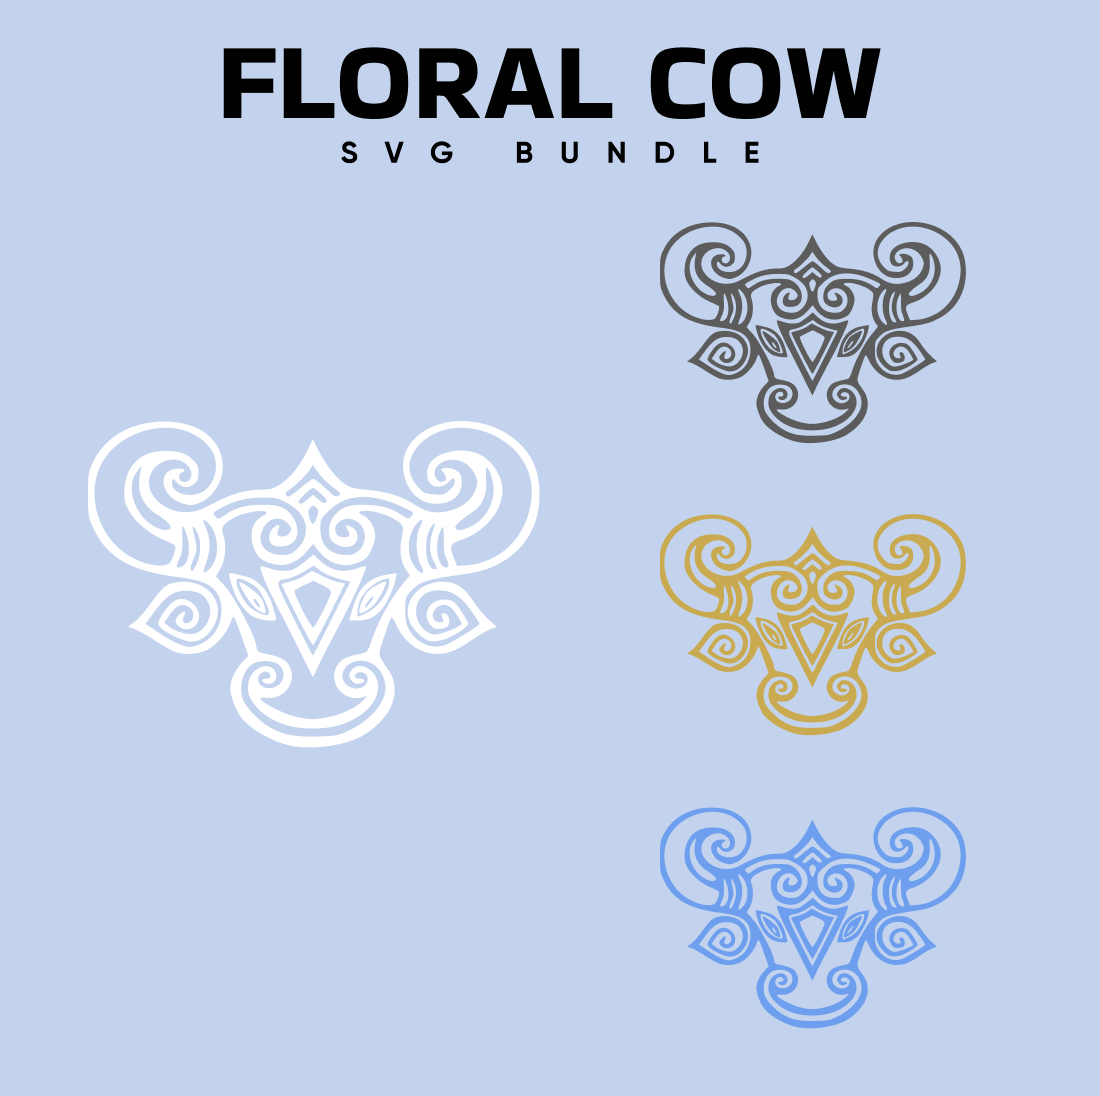 Set of four different logos for a company.